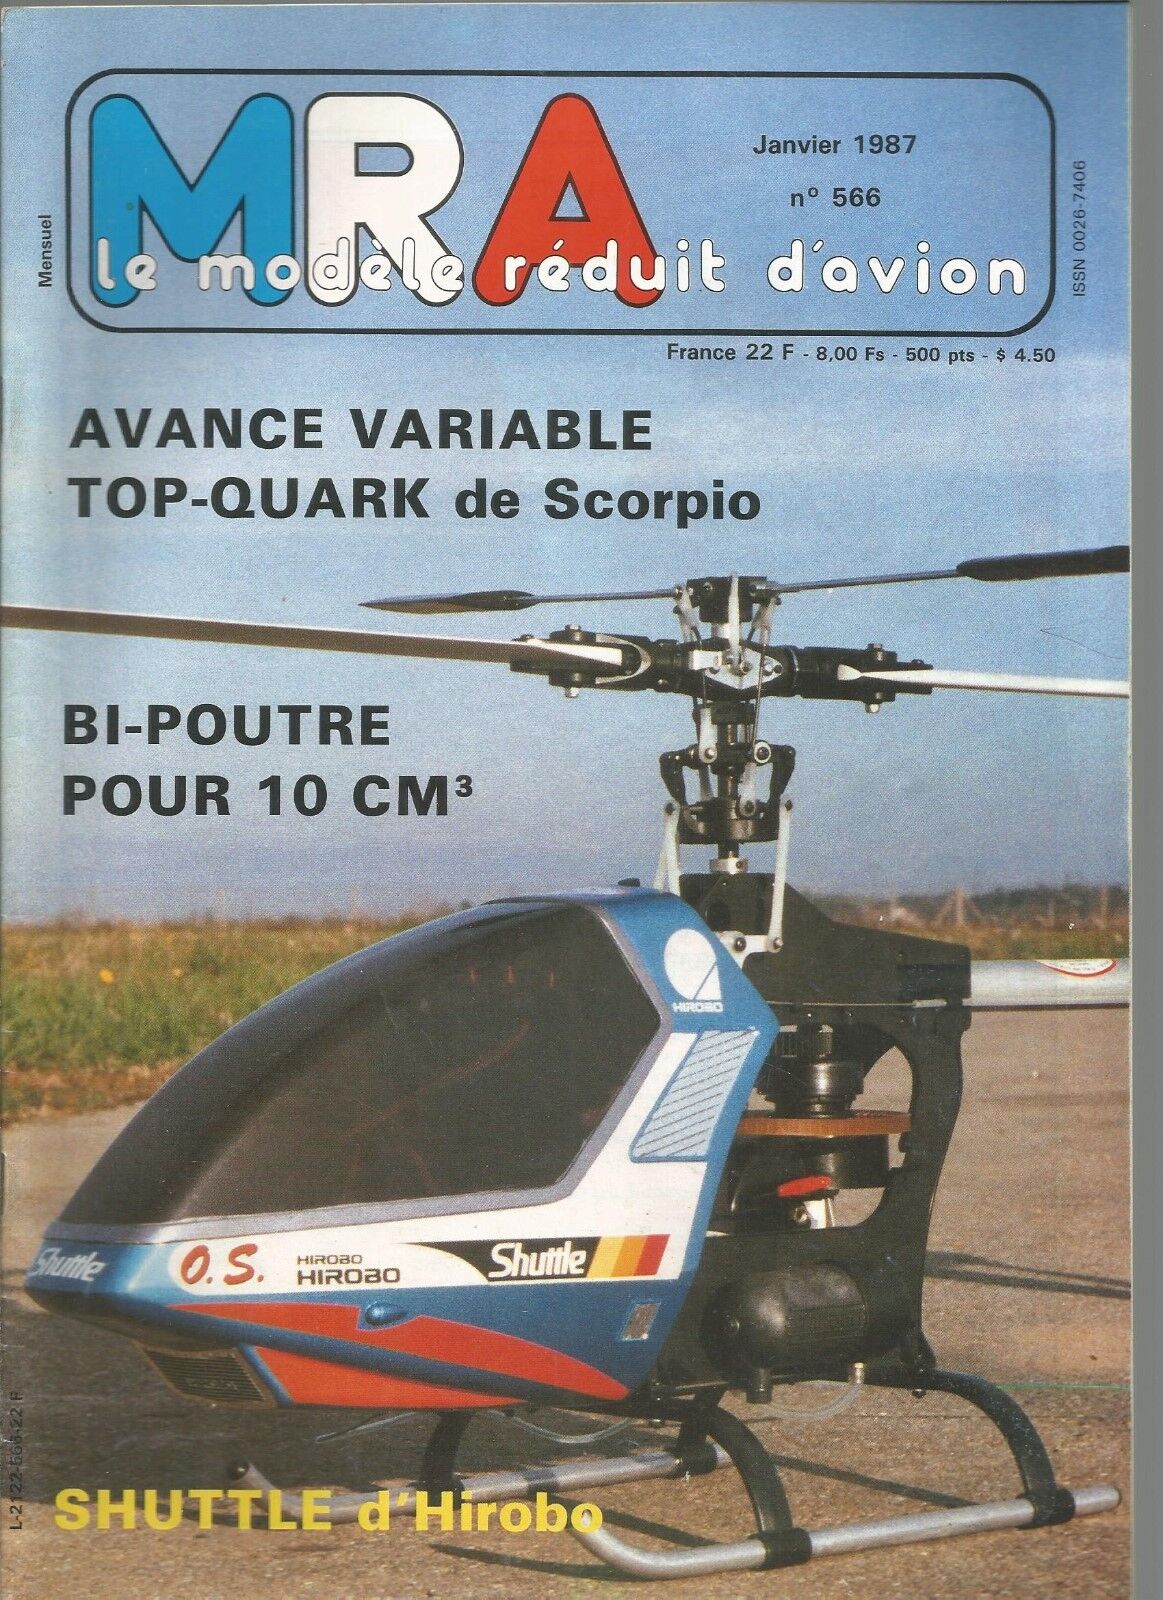 Mra no. 566 airplane in balsa/electronic ignition and variable advance/bi-pou